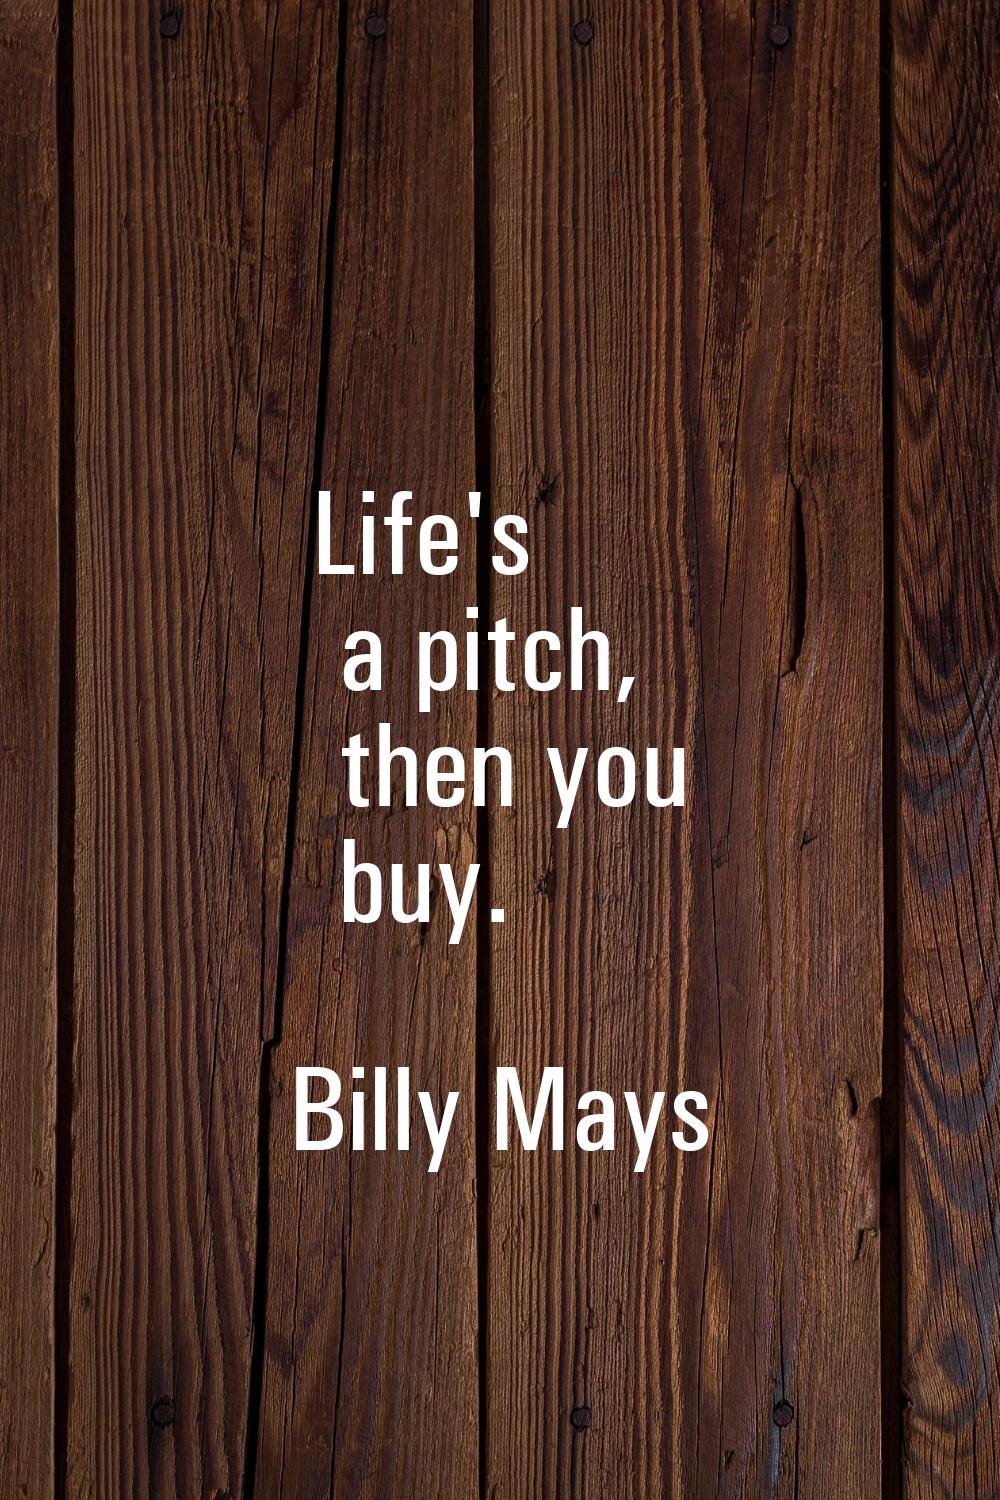 Life's a pitch, then you buy.